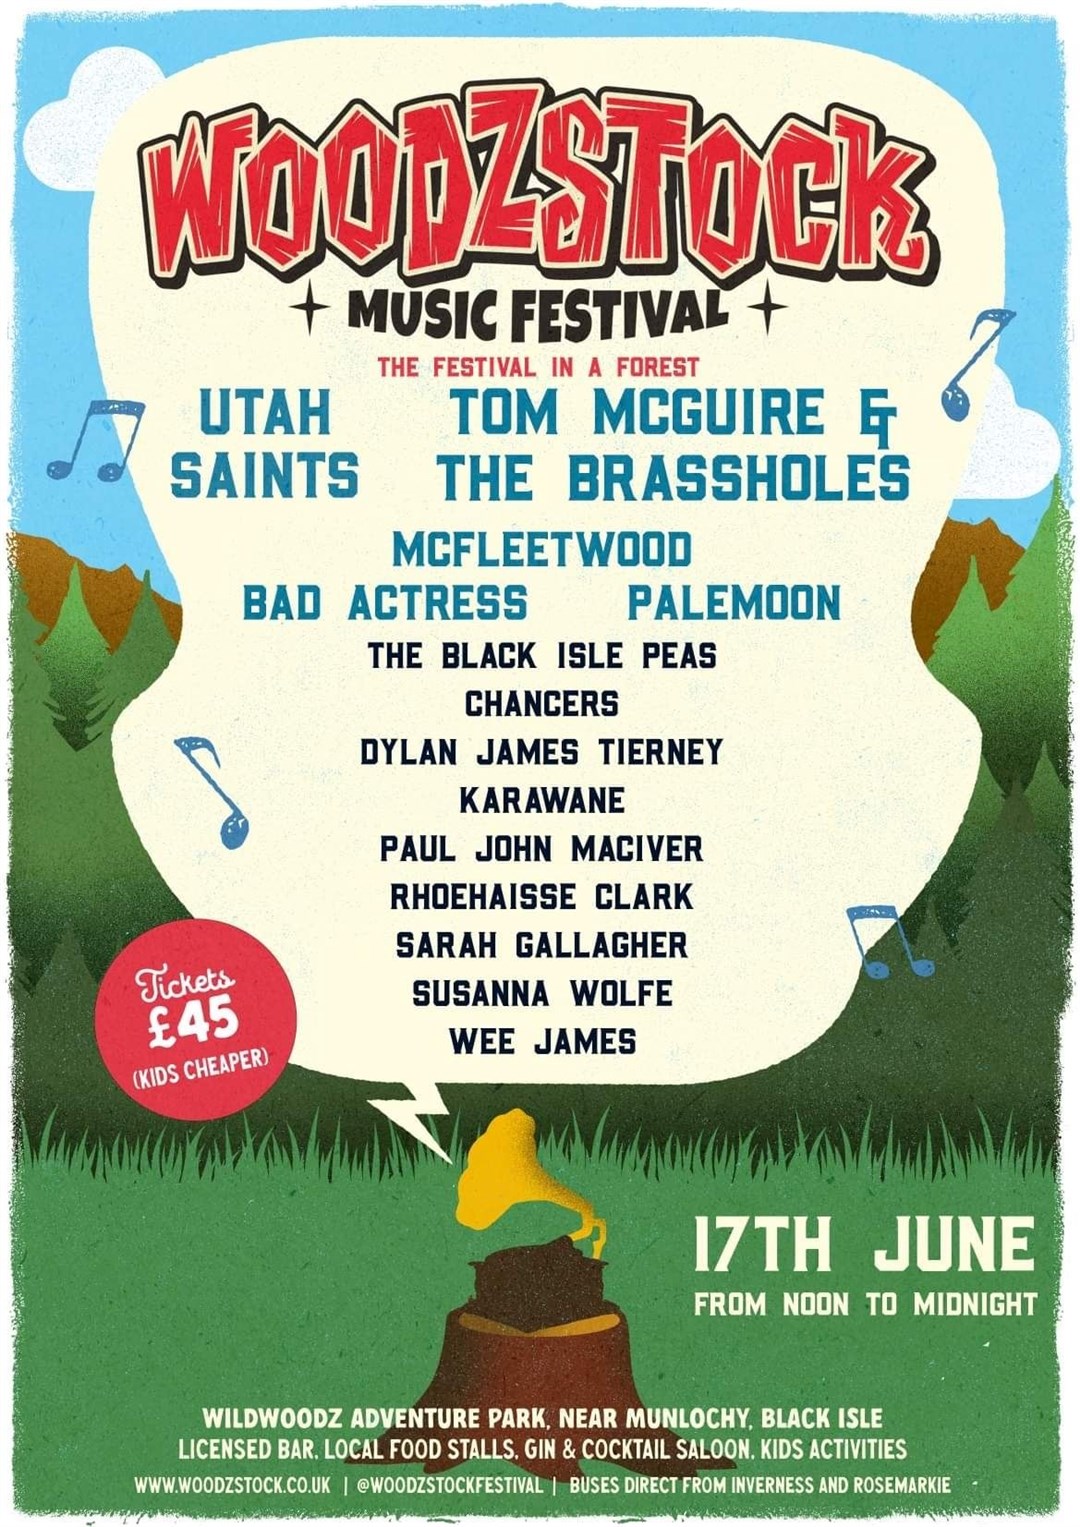 The latest Woodzstock poster.